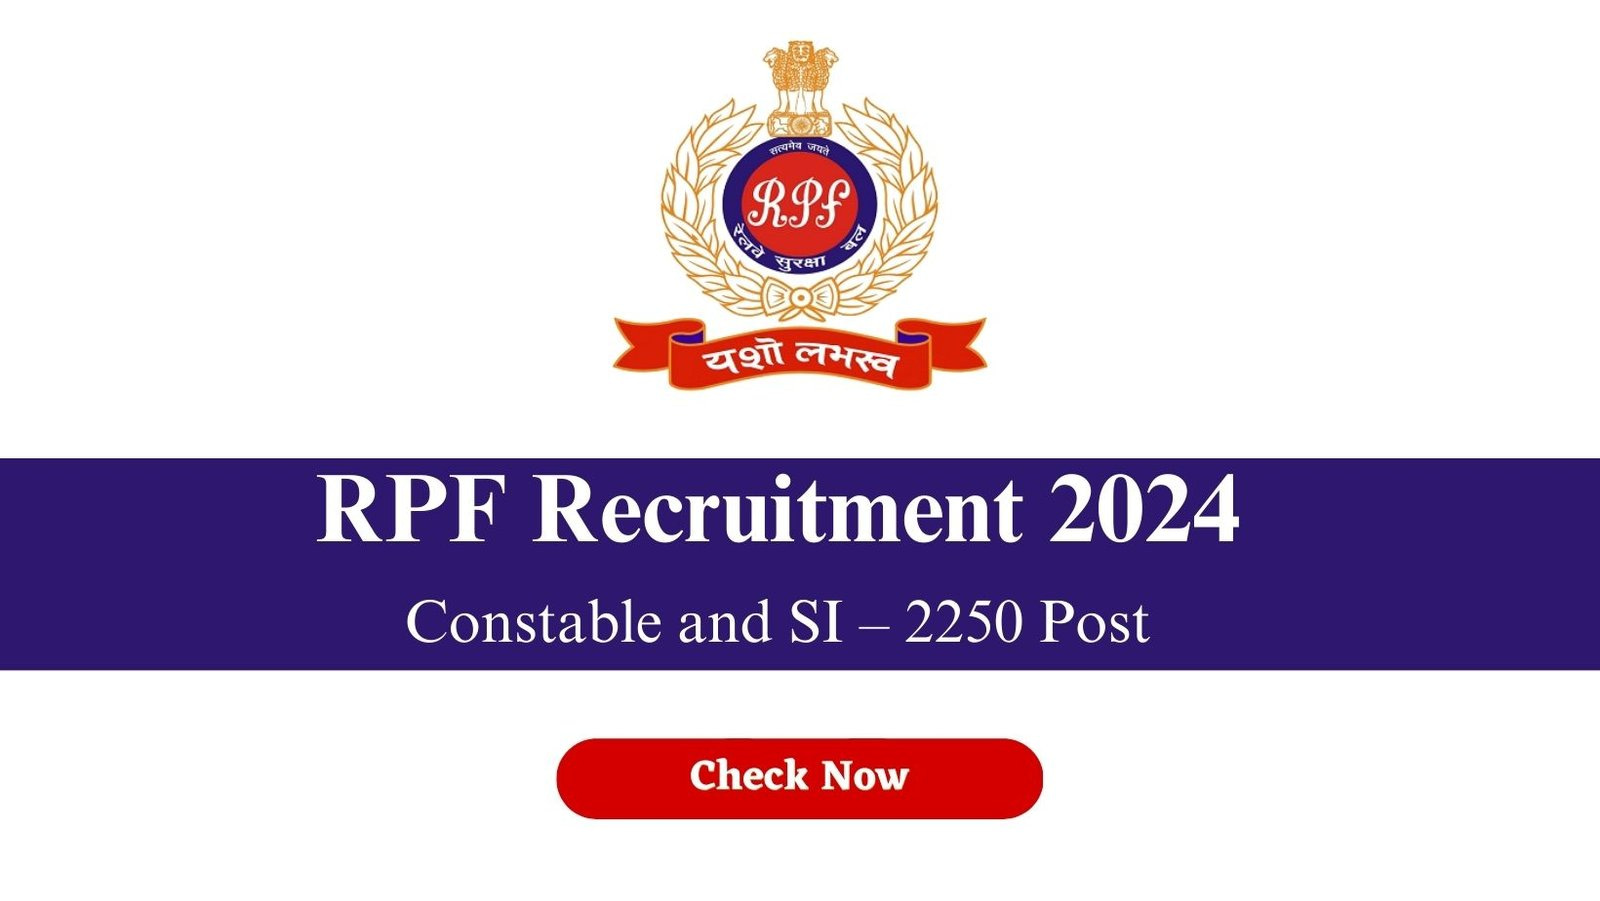 RPF Recruitment 2024 Notification for Constable and SI – 2250 Post